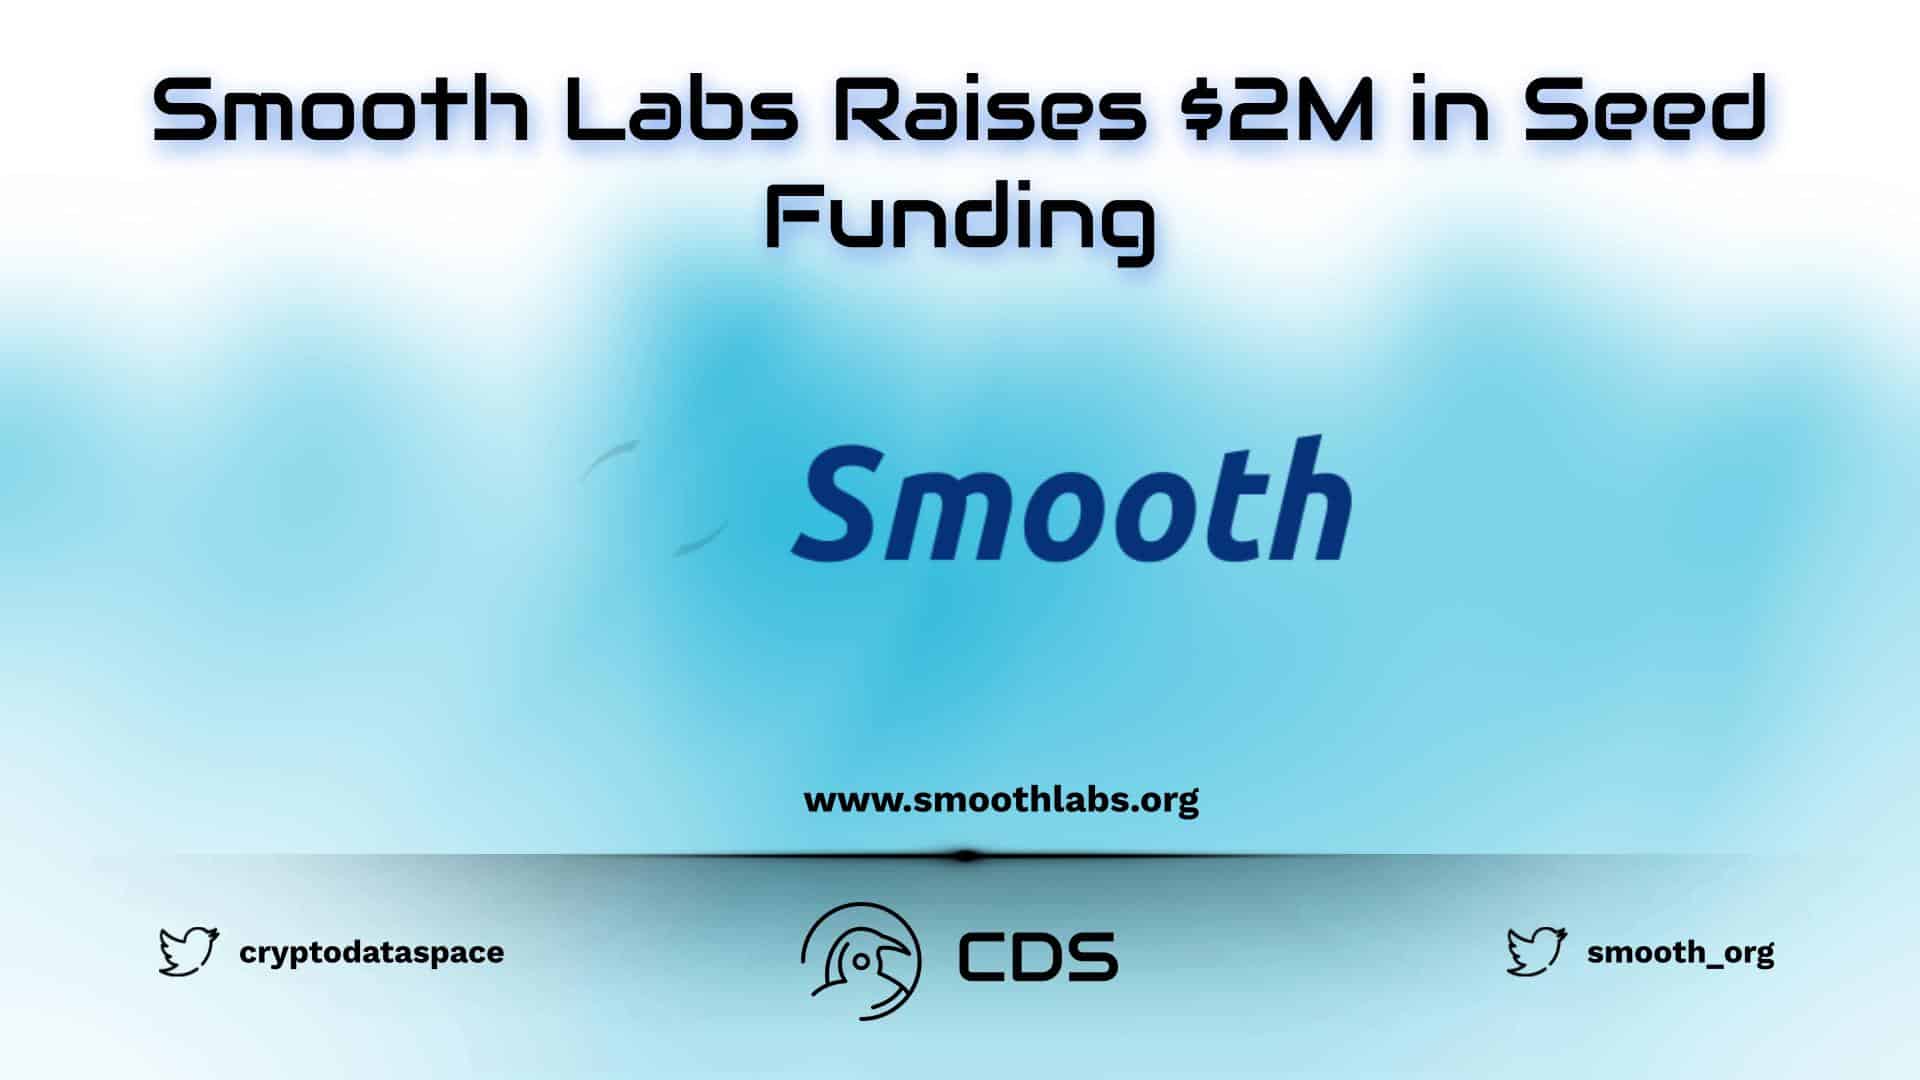 Smooth Labs Raises $2M in Seed Funding